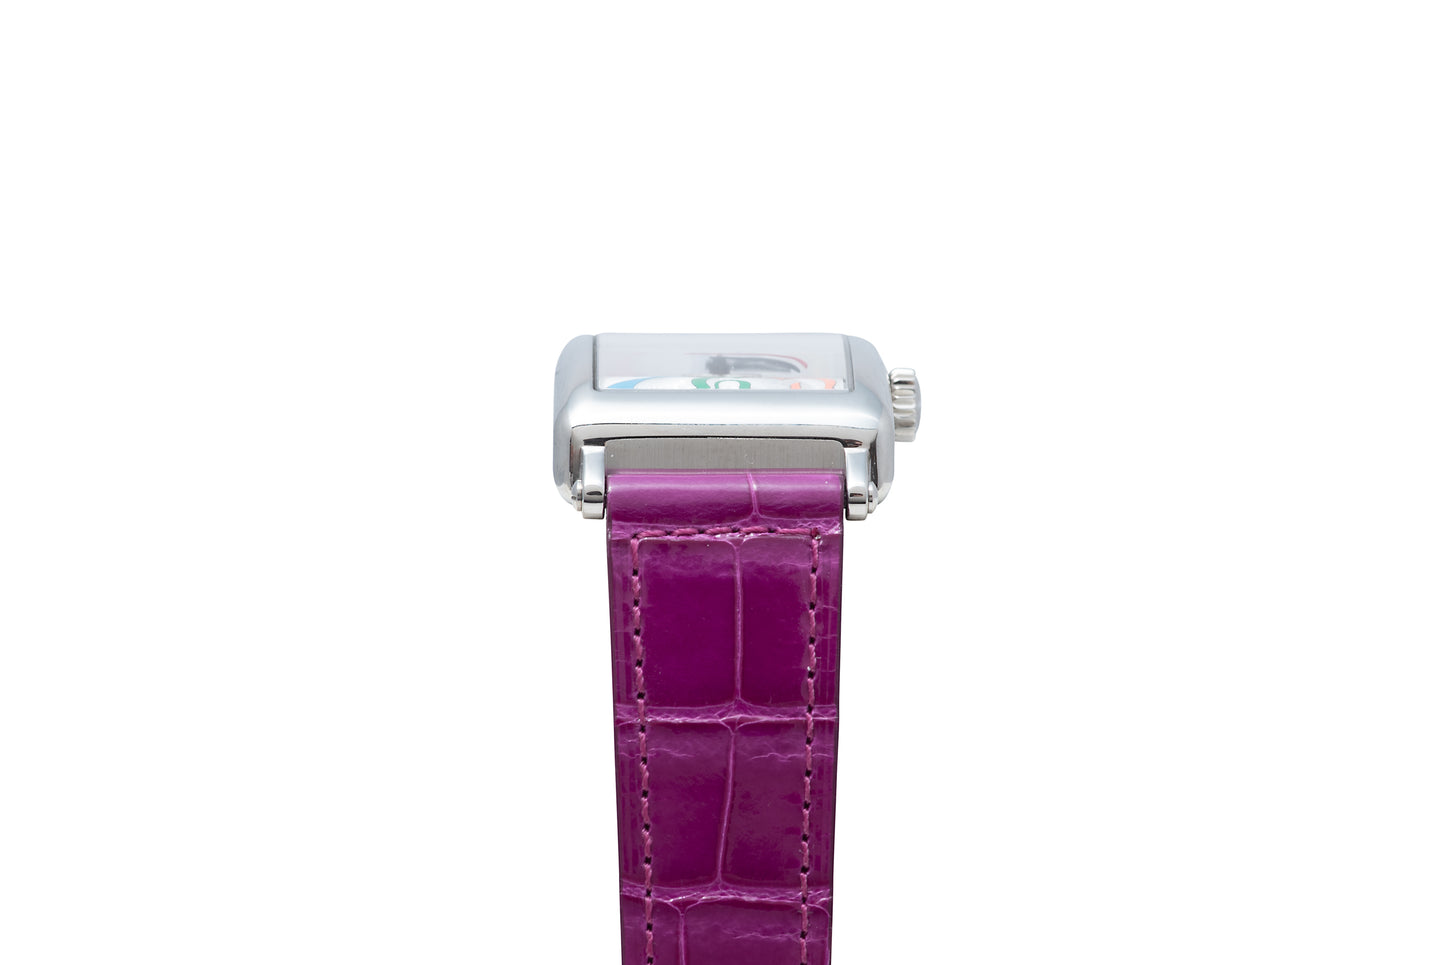 Franck Muller Long Island Color Dreams 25th Anniversary Collection